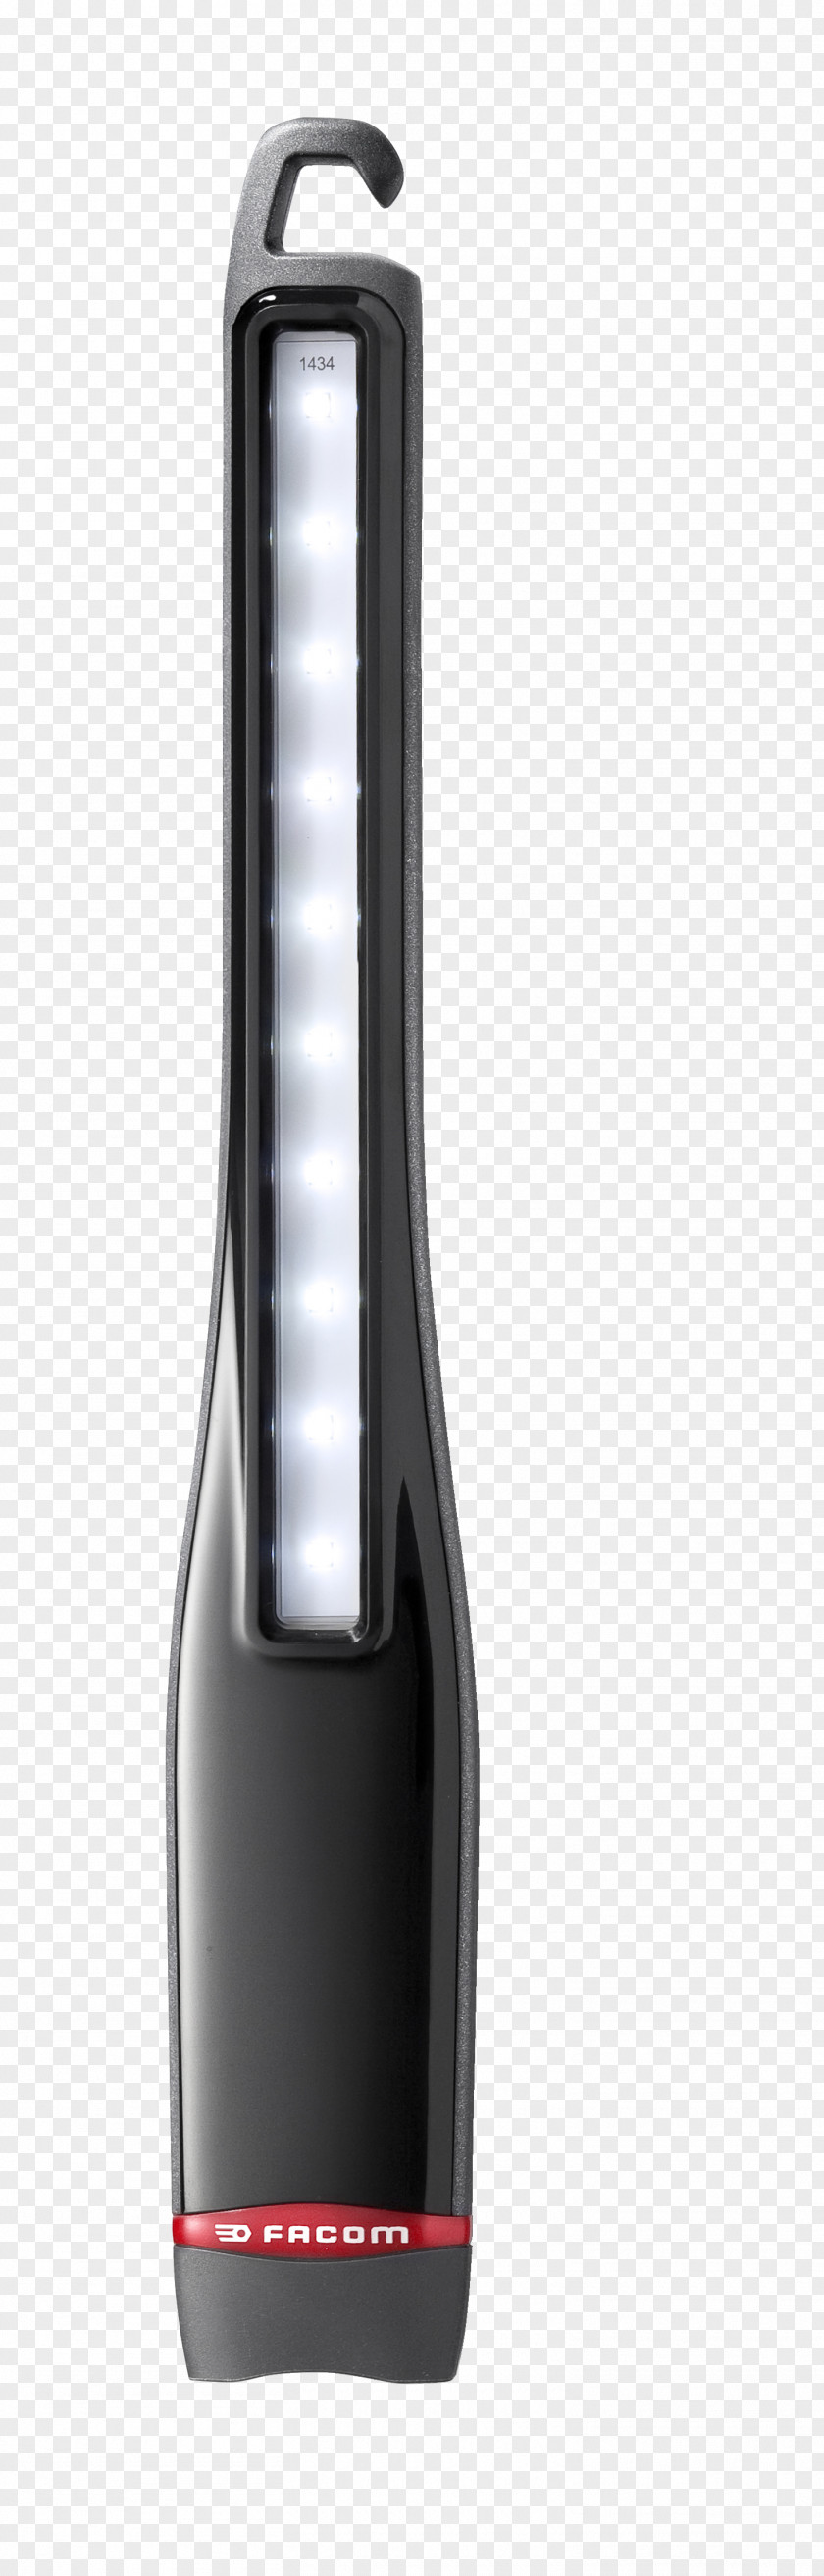 Lamp Product Amazon.com Wireless Price PNG